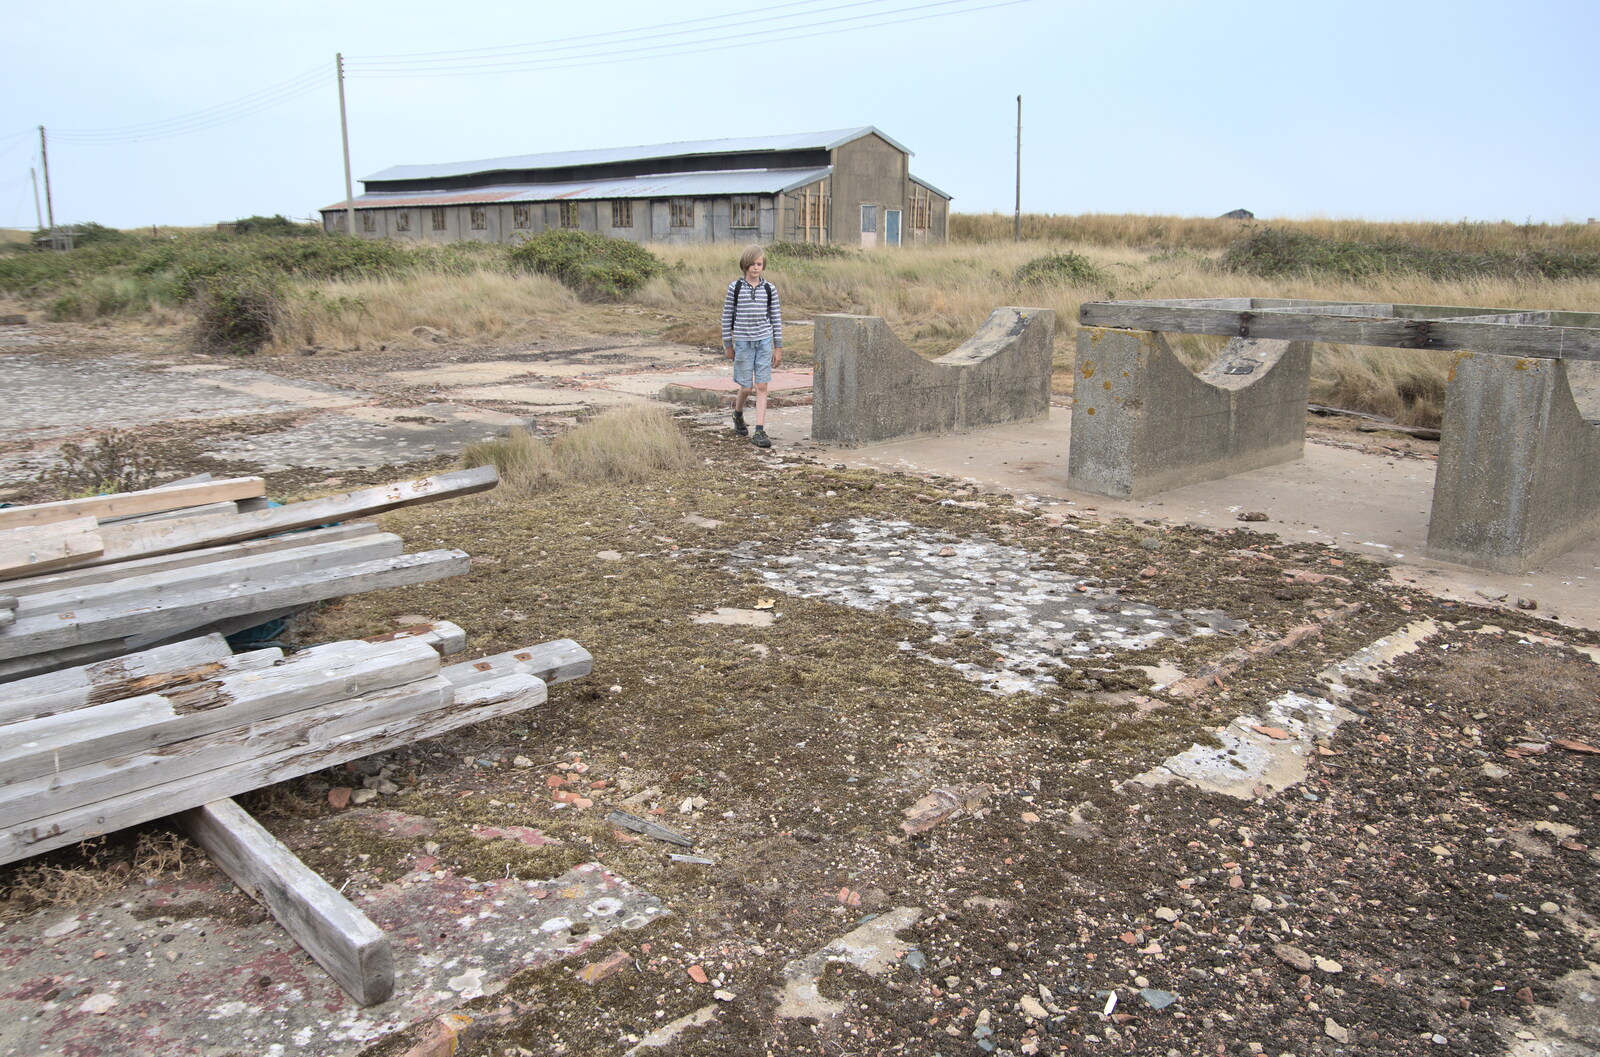 Harry roams around the post-apocolyptic landscape from A Trip to Orford Ness, Orford, Suffolk - 16th August 2022